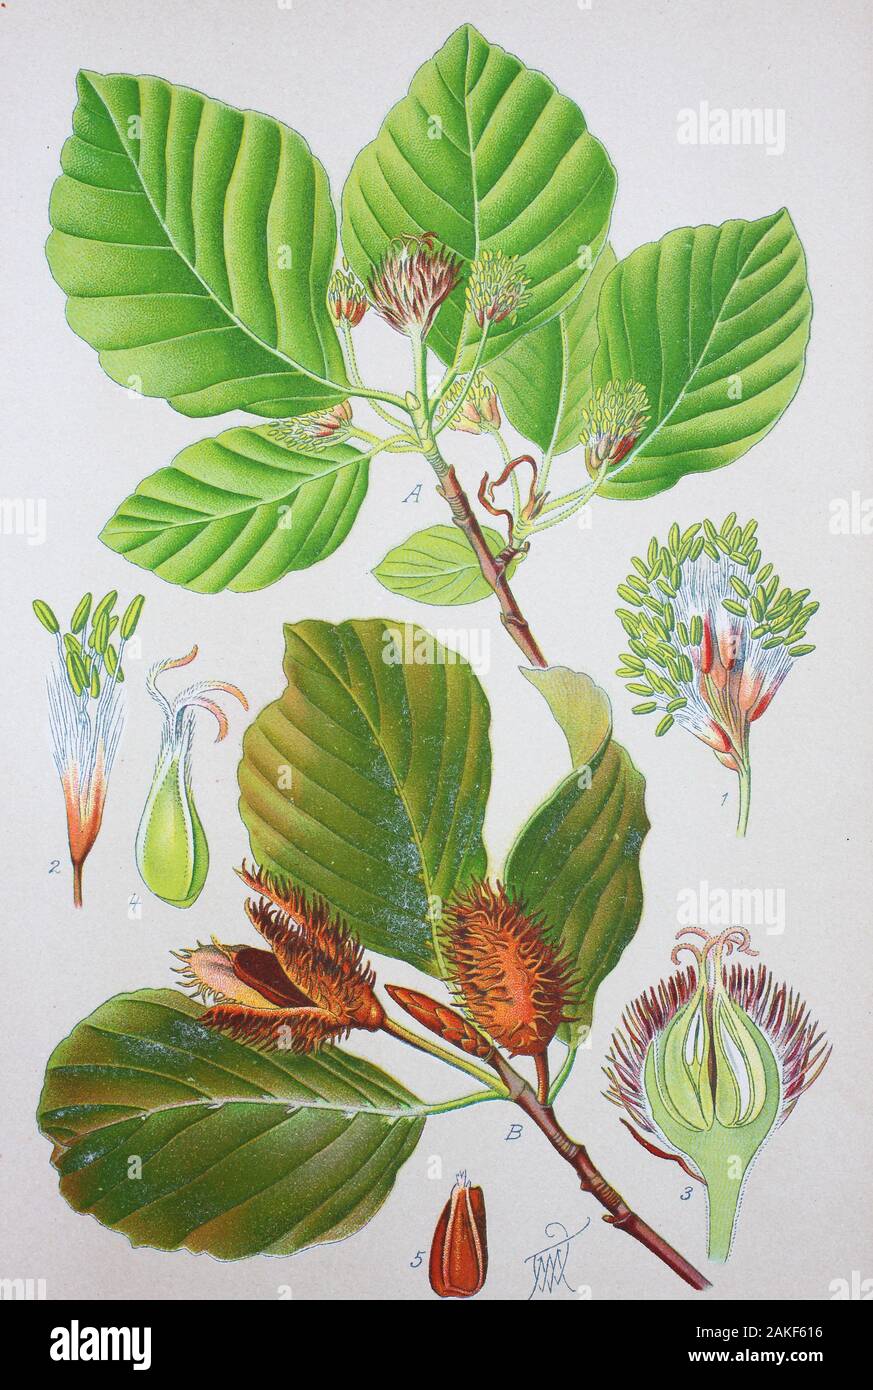 Fagus sylvatica, the European beech or common beech, is a deciduous tree belonging to the beech family Fagaceae  /  Rotbuche, digital improved reproduction of an original from the 19th century / digitale Reproduktion einer Originalvorlage aus dem 19. Jahrhundert Stock Photo